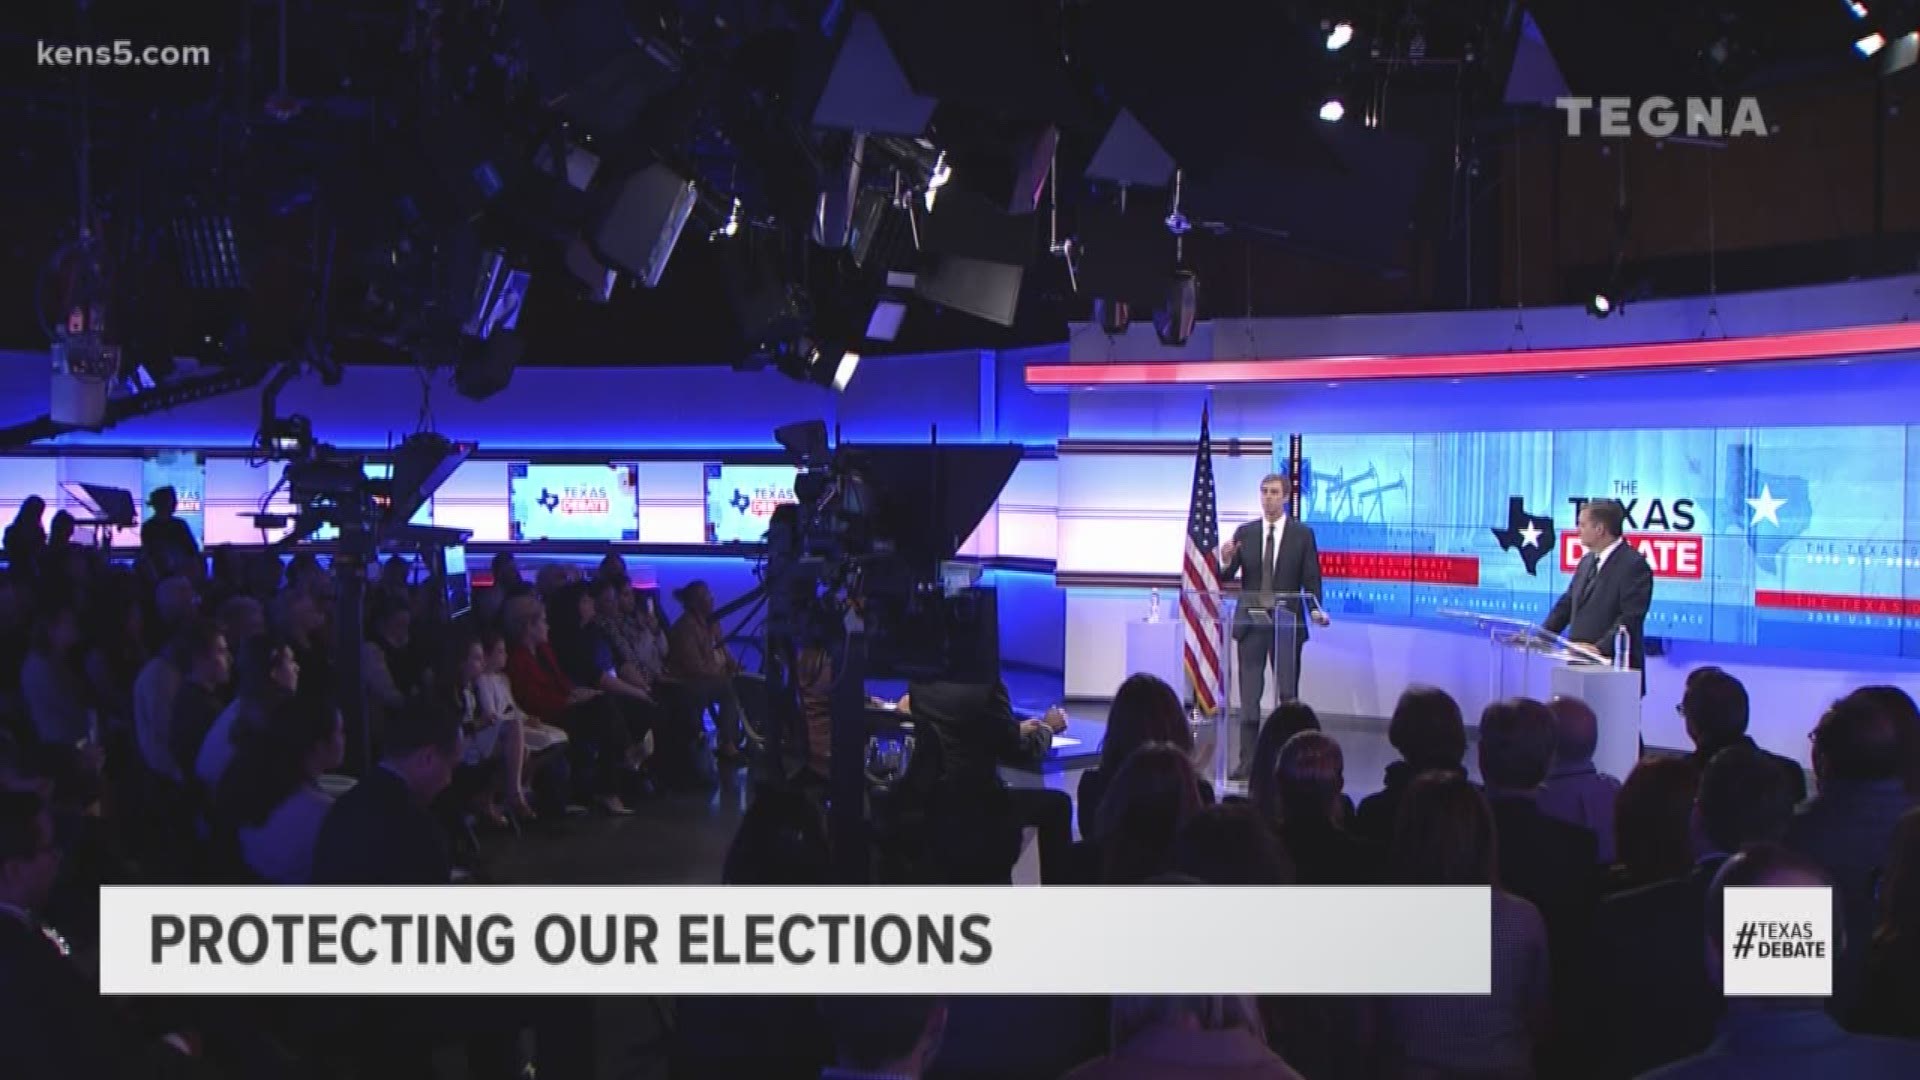 Candidate Beto O'Rourke says that U.S. elections are under attack from foreign governments and criticizes Sen. Ted Cruz for voting against policies that would protect elections.